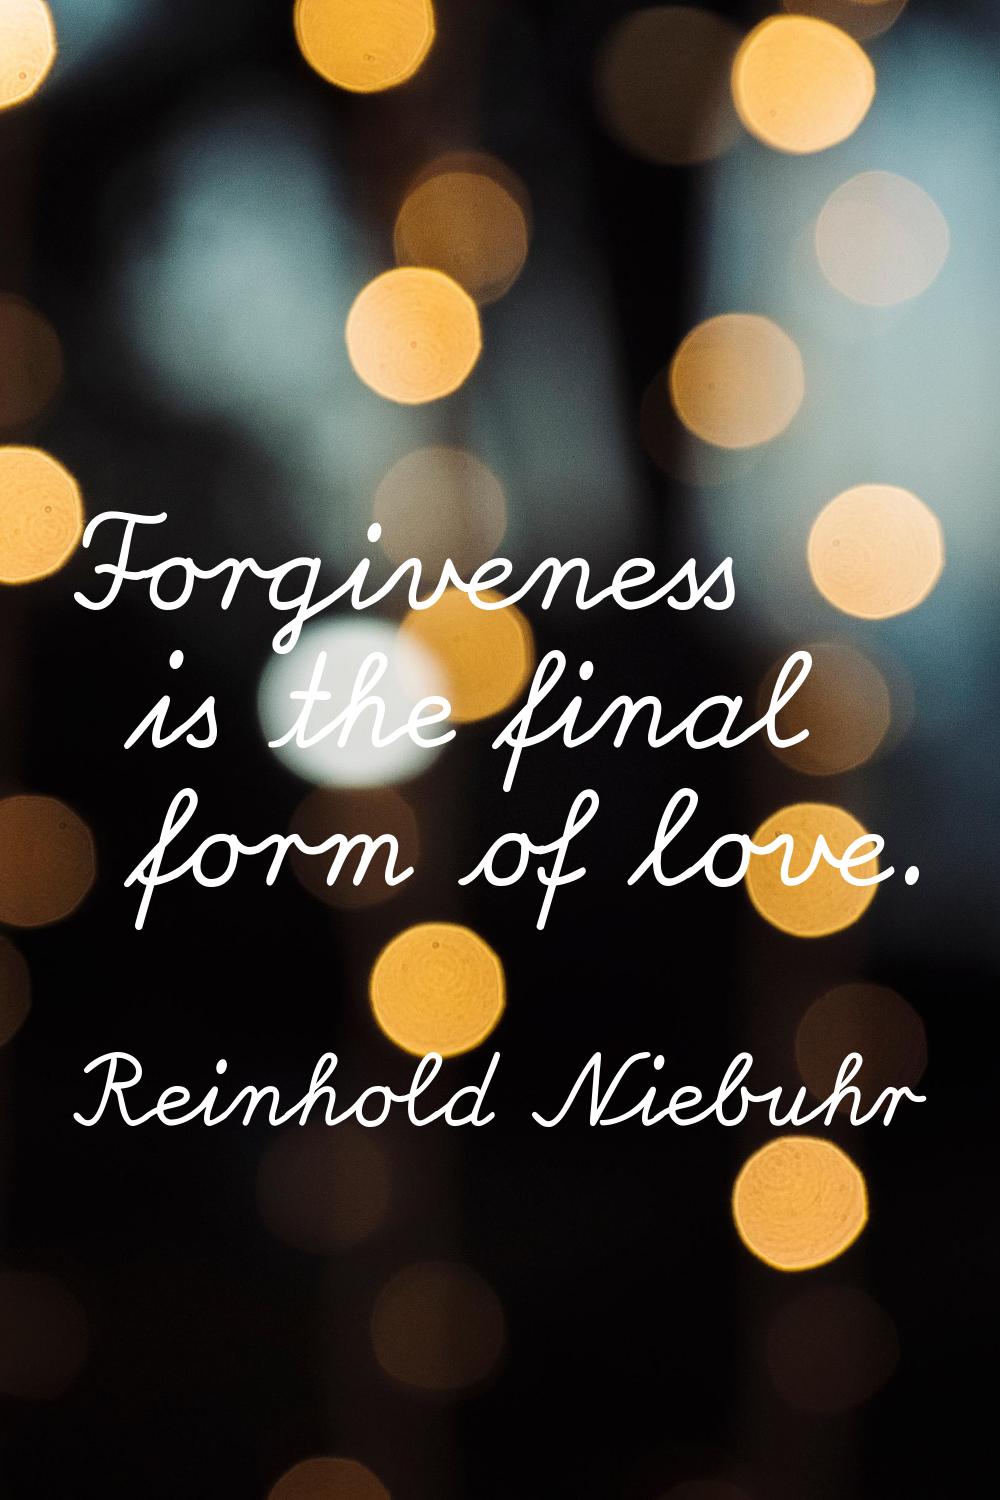 Forgiveness is the final form of love.